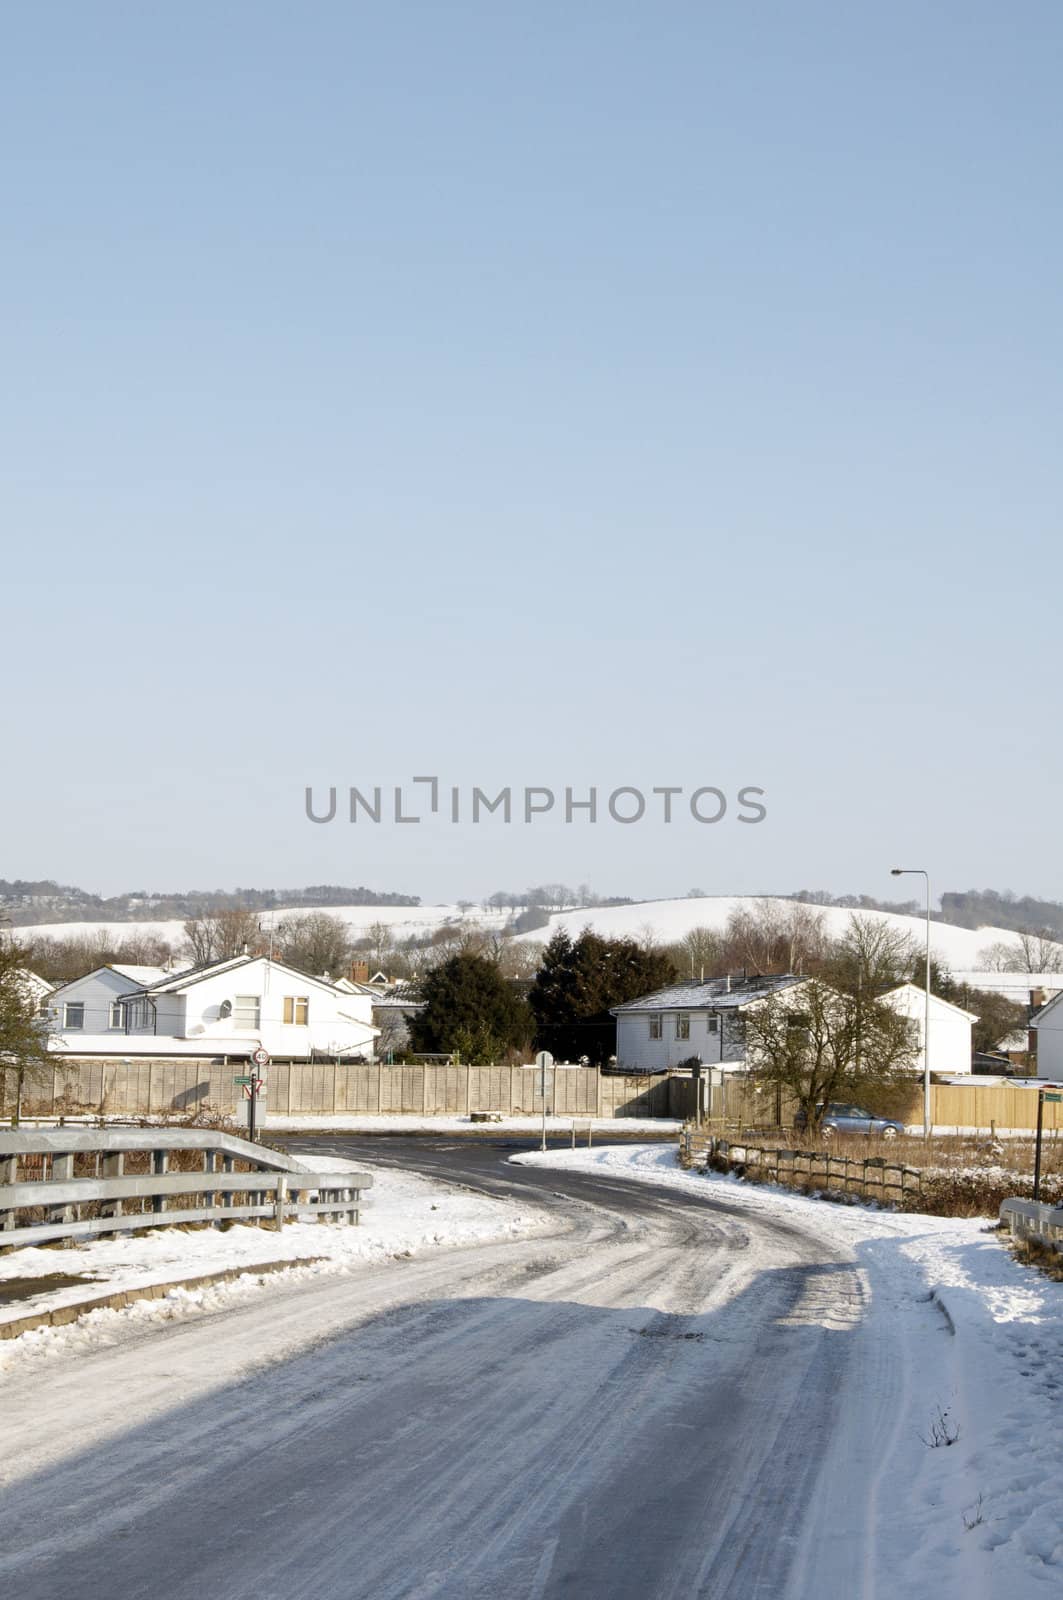 A country lane covered in snow